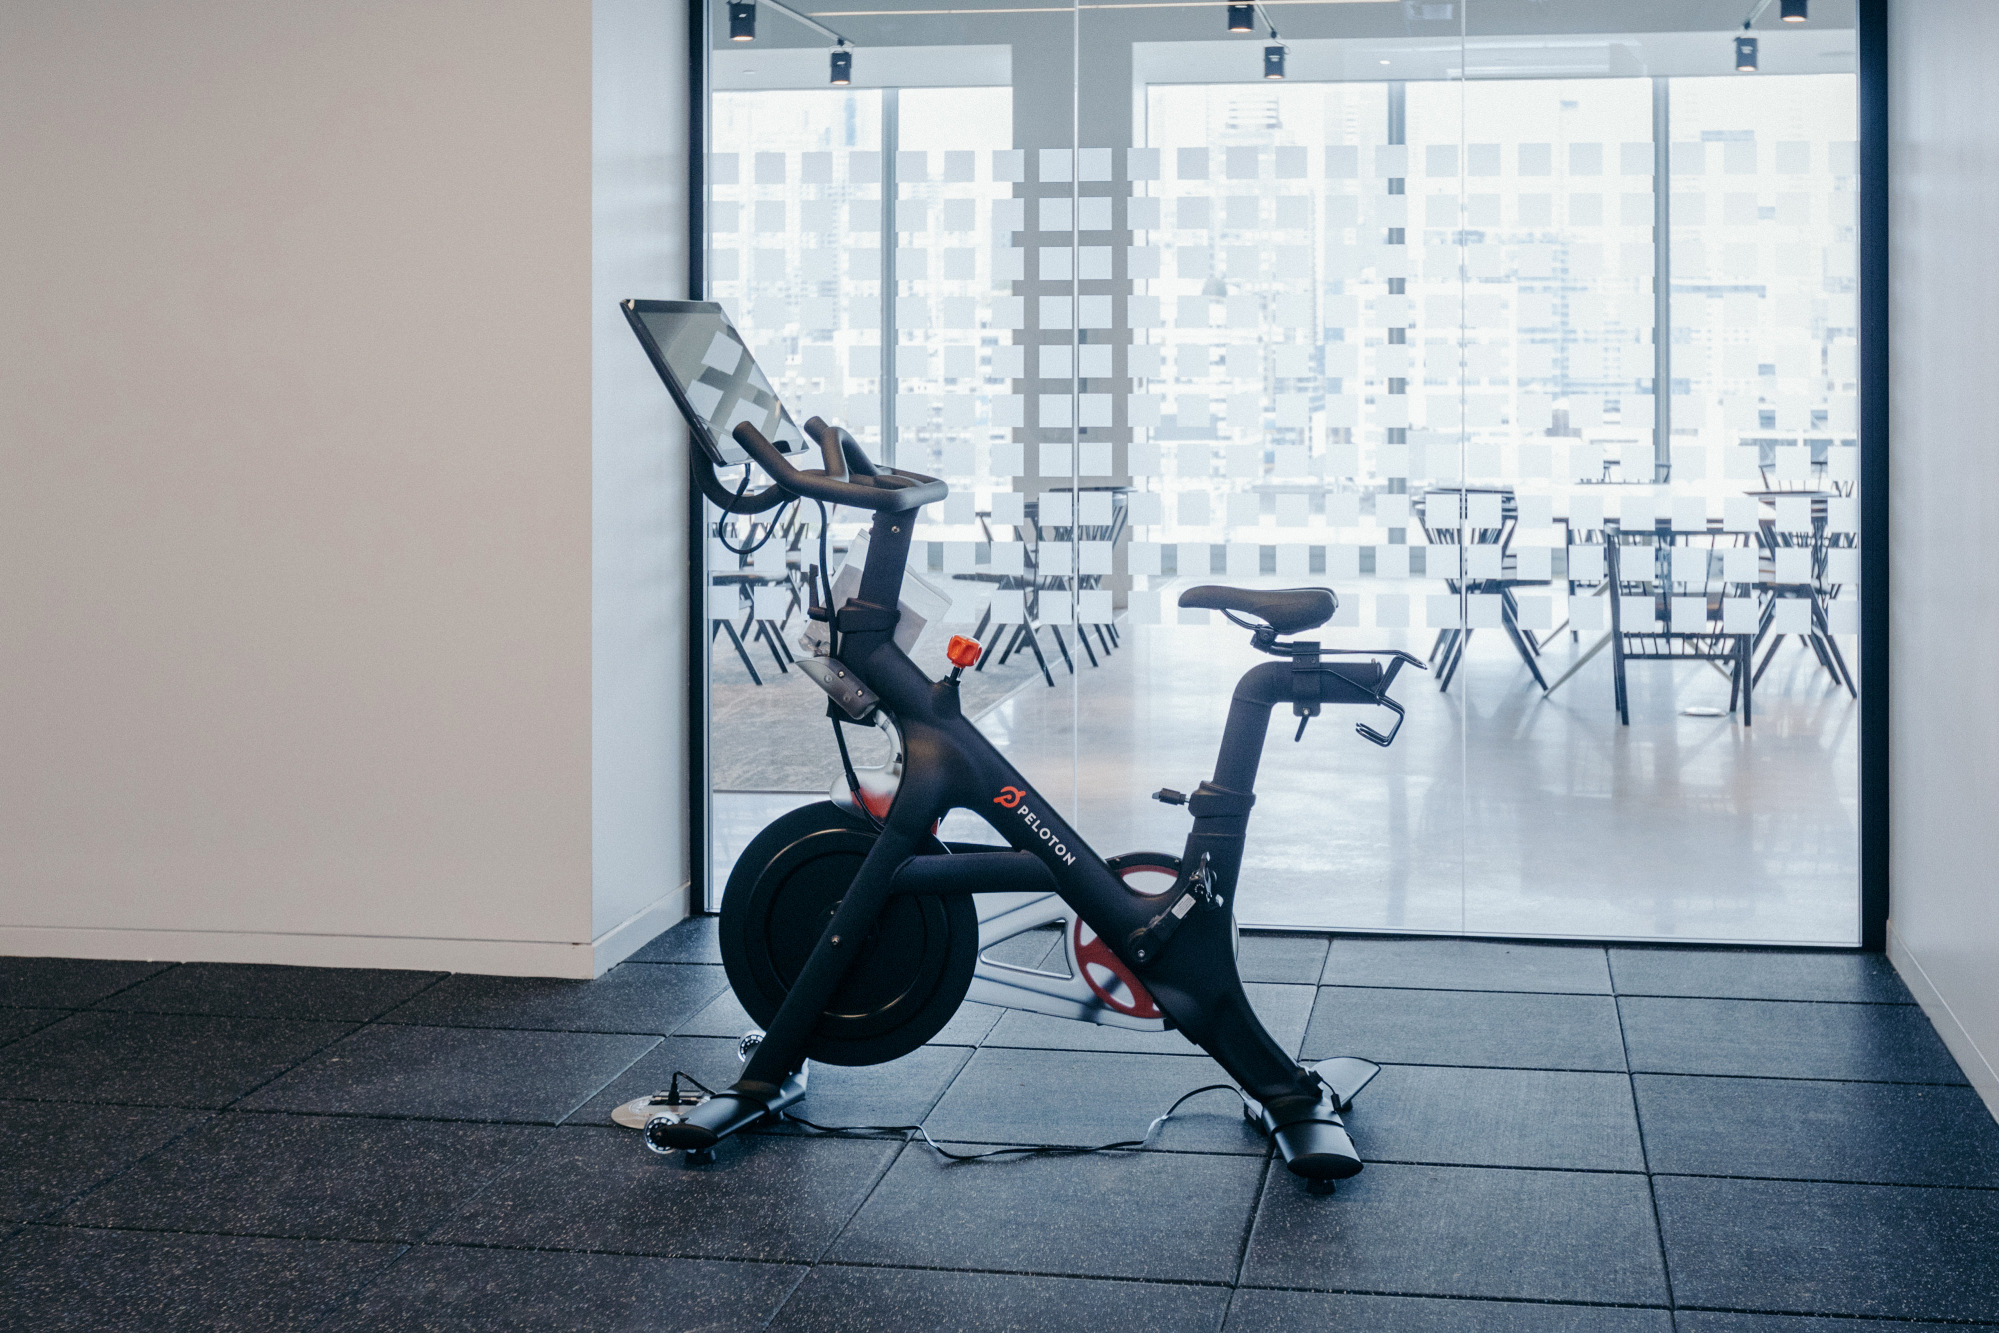 A Brief History of Peloton: A Look at the Cycling Startup's